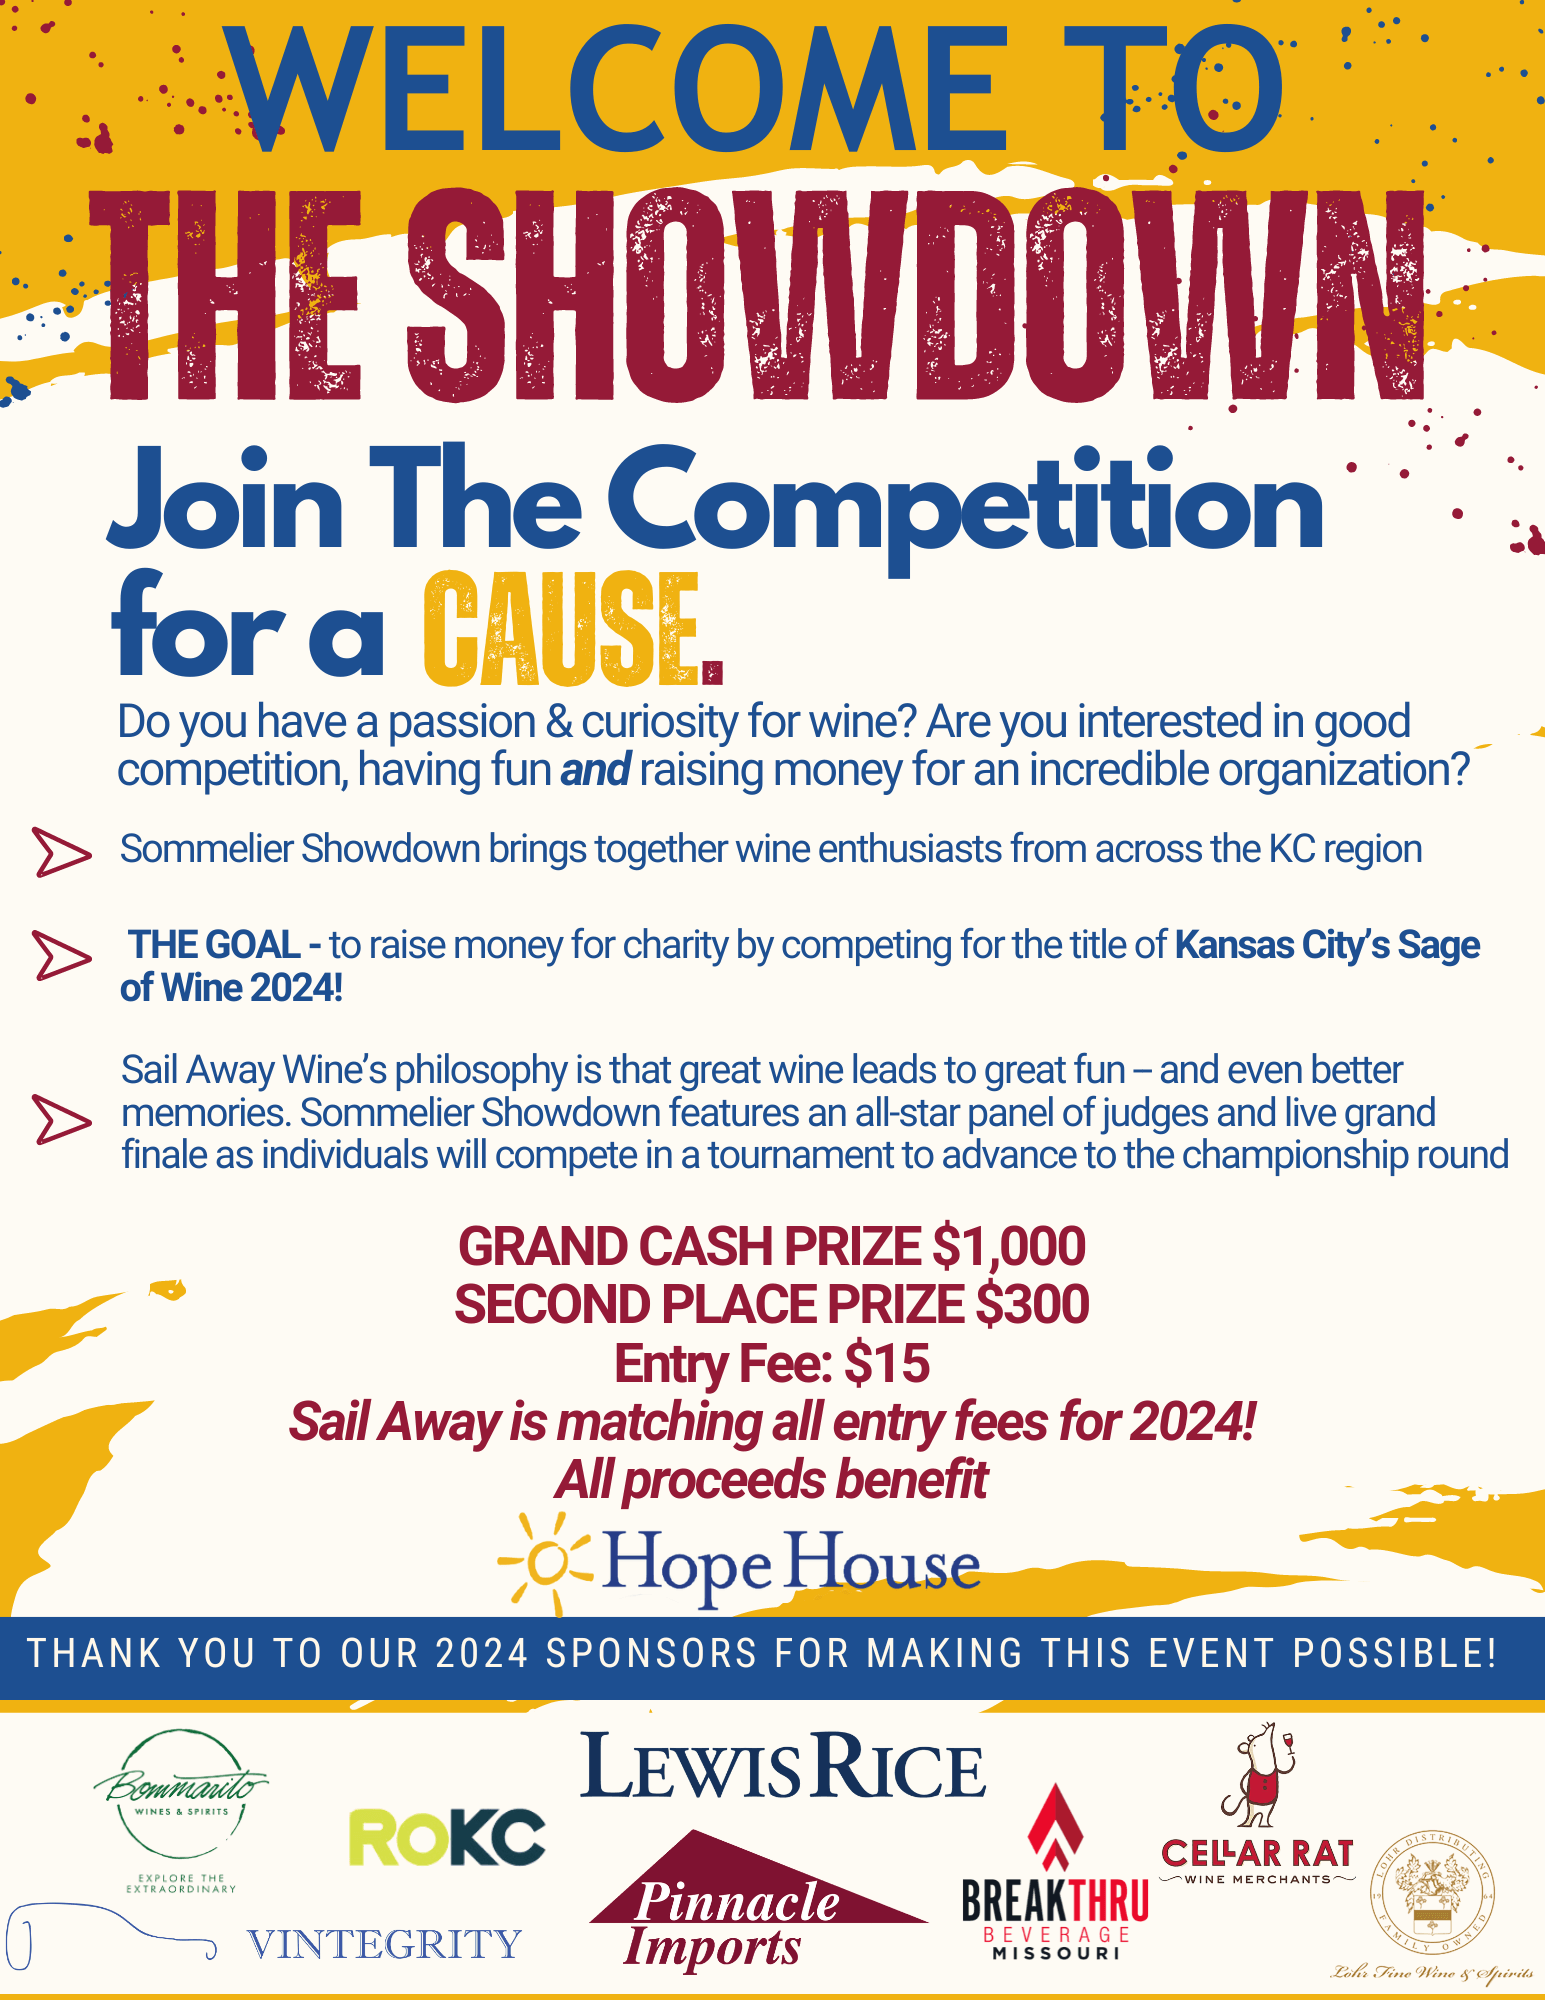 This is a flier detailing information about the 2024 Sommelier Showdown. Important details include that contestants compete against each other in a wine tasting tournament to raise money for a charitable cause: this year being Hope House in Kansas City. Compete for the community!